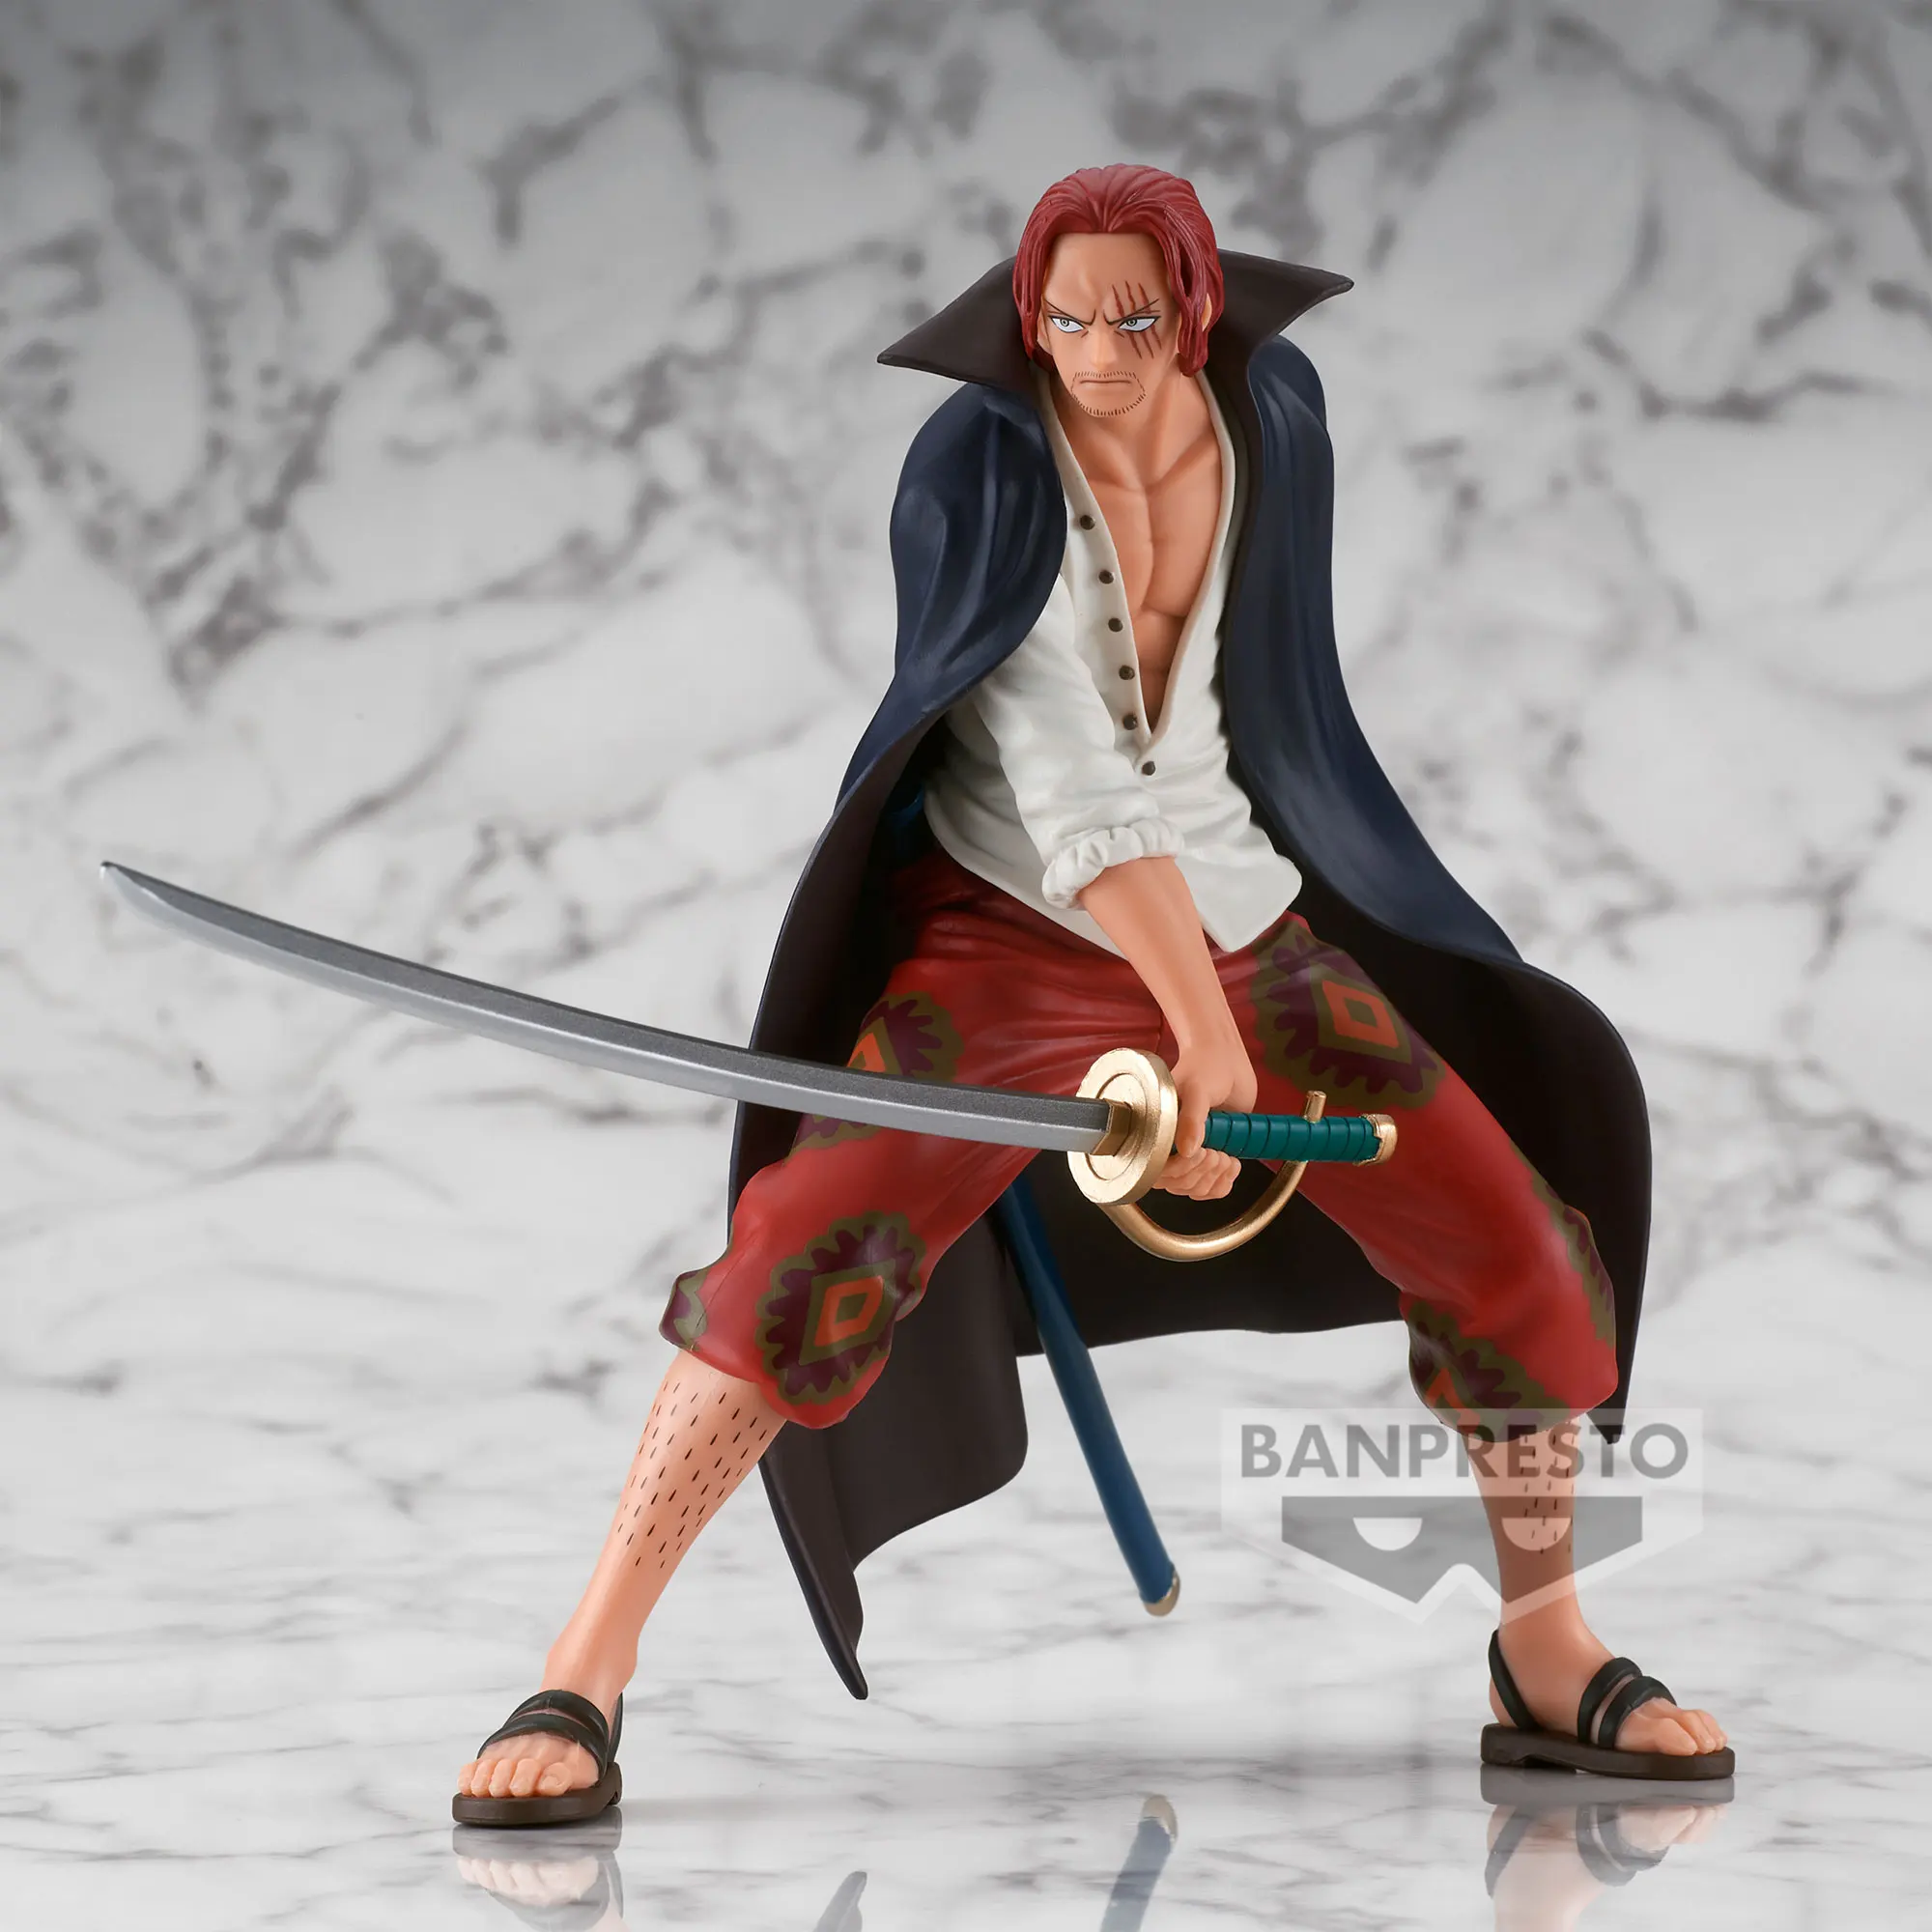 In stock Bandai Original Banpresto One Piece Shanks Anime Figure DXF Theatrical Edition Red PVC Model Collectible Gift